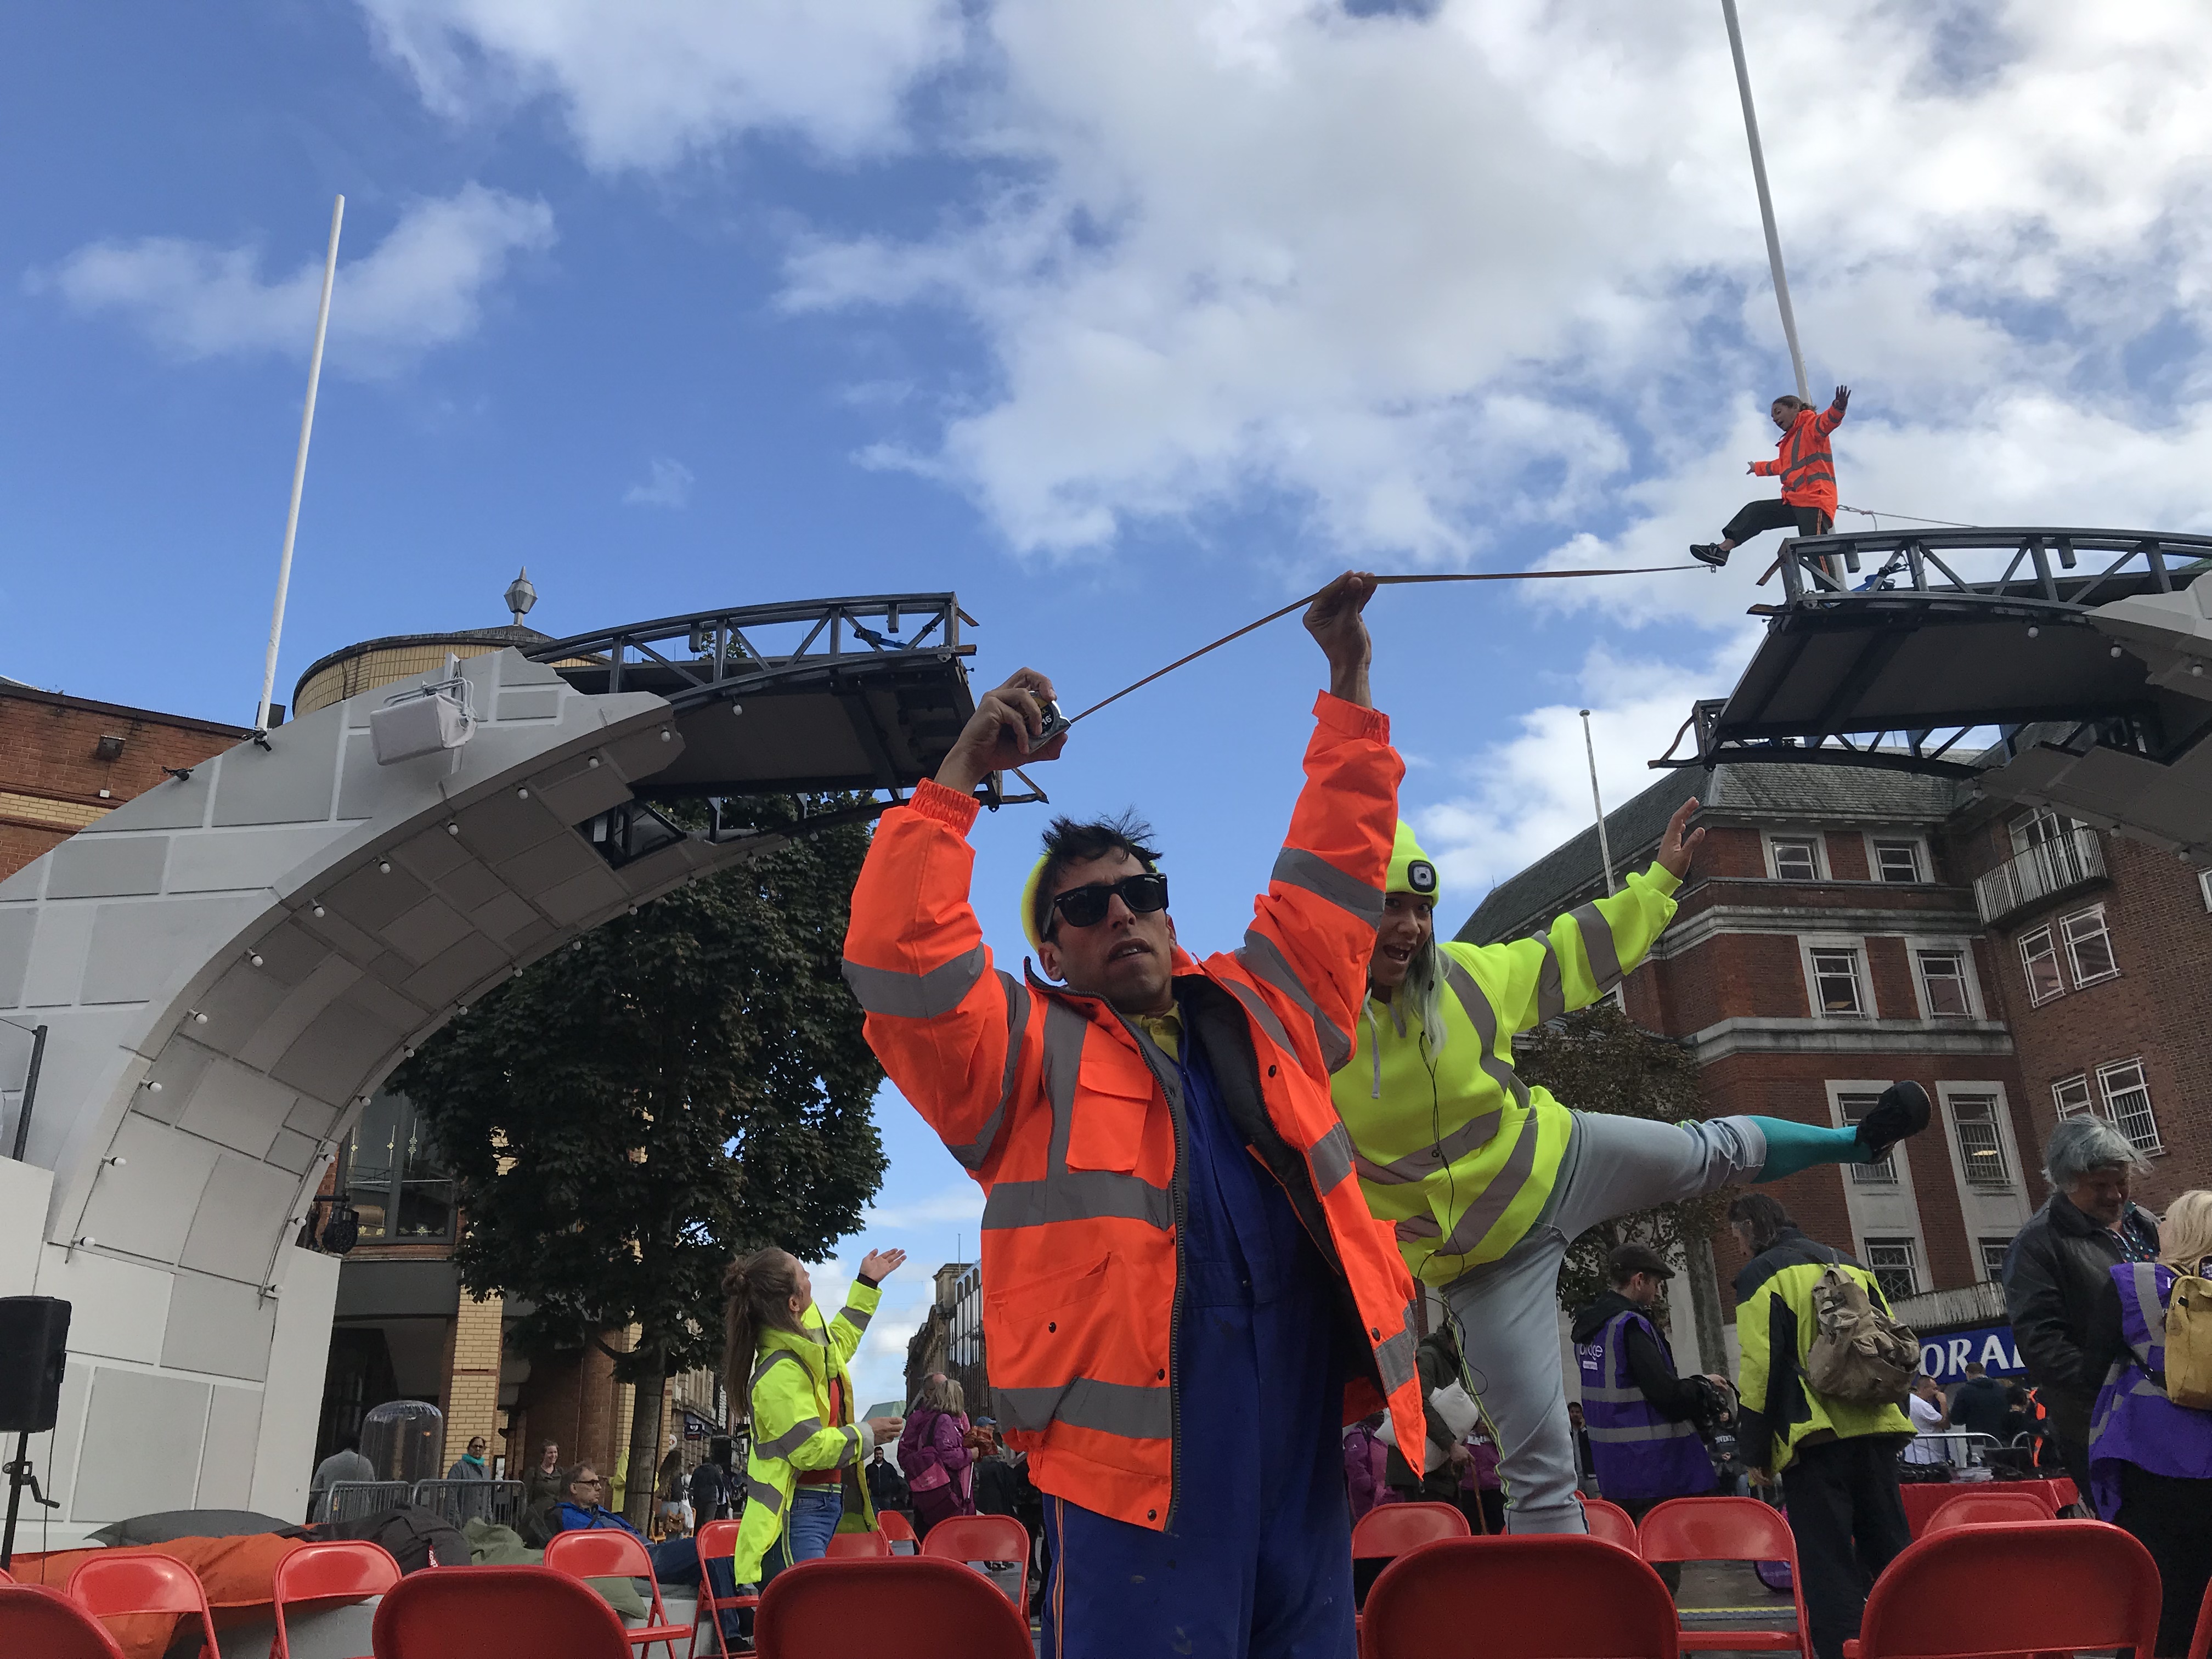 Two clowns wearing high vis clothes hold out a tape measure against the bridge. Up high, a performer steps out and appears to be walking on the tape measure. 